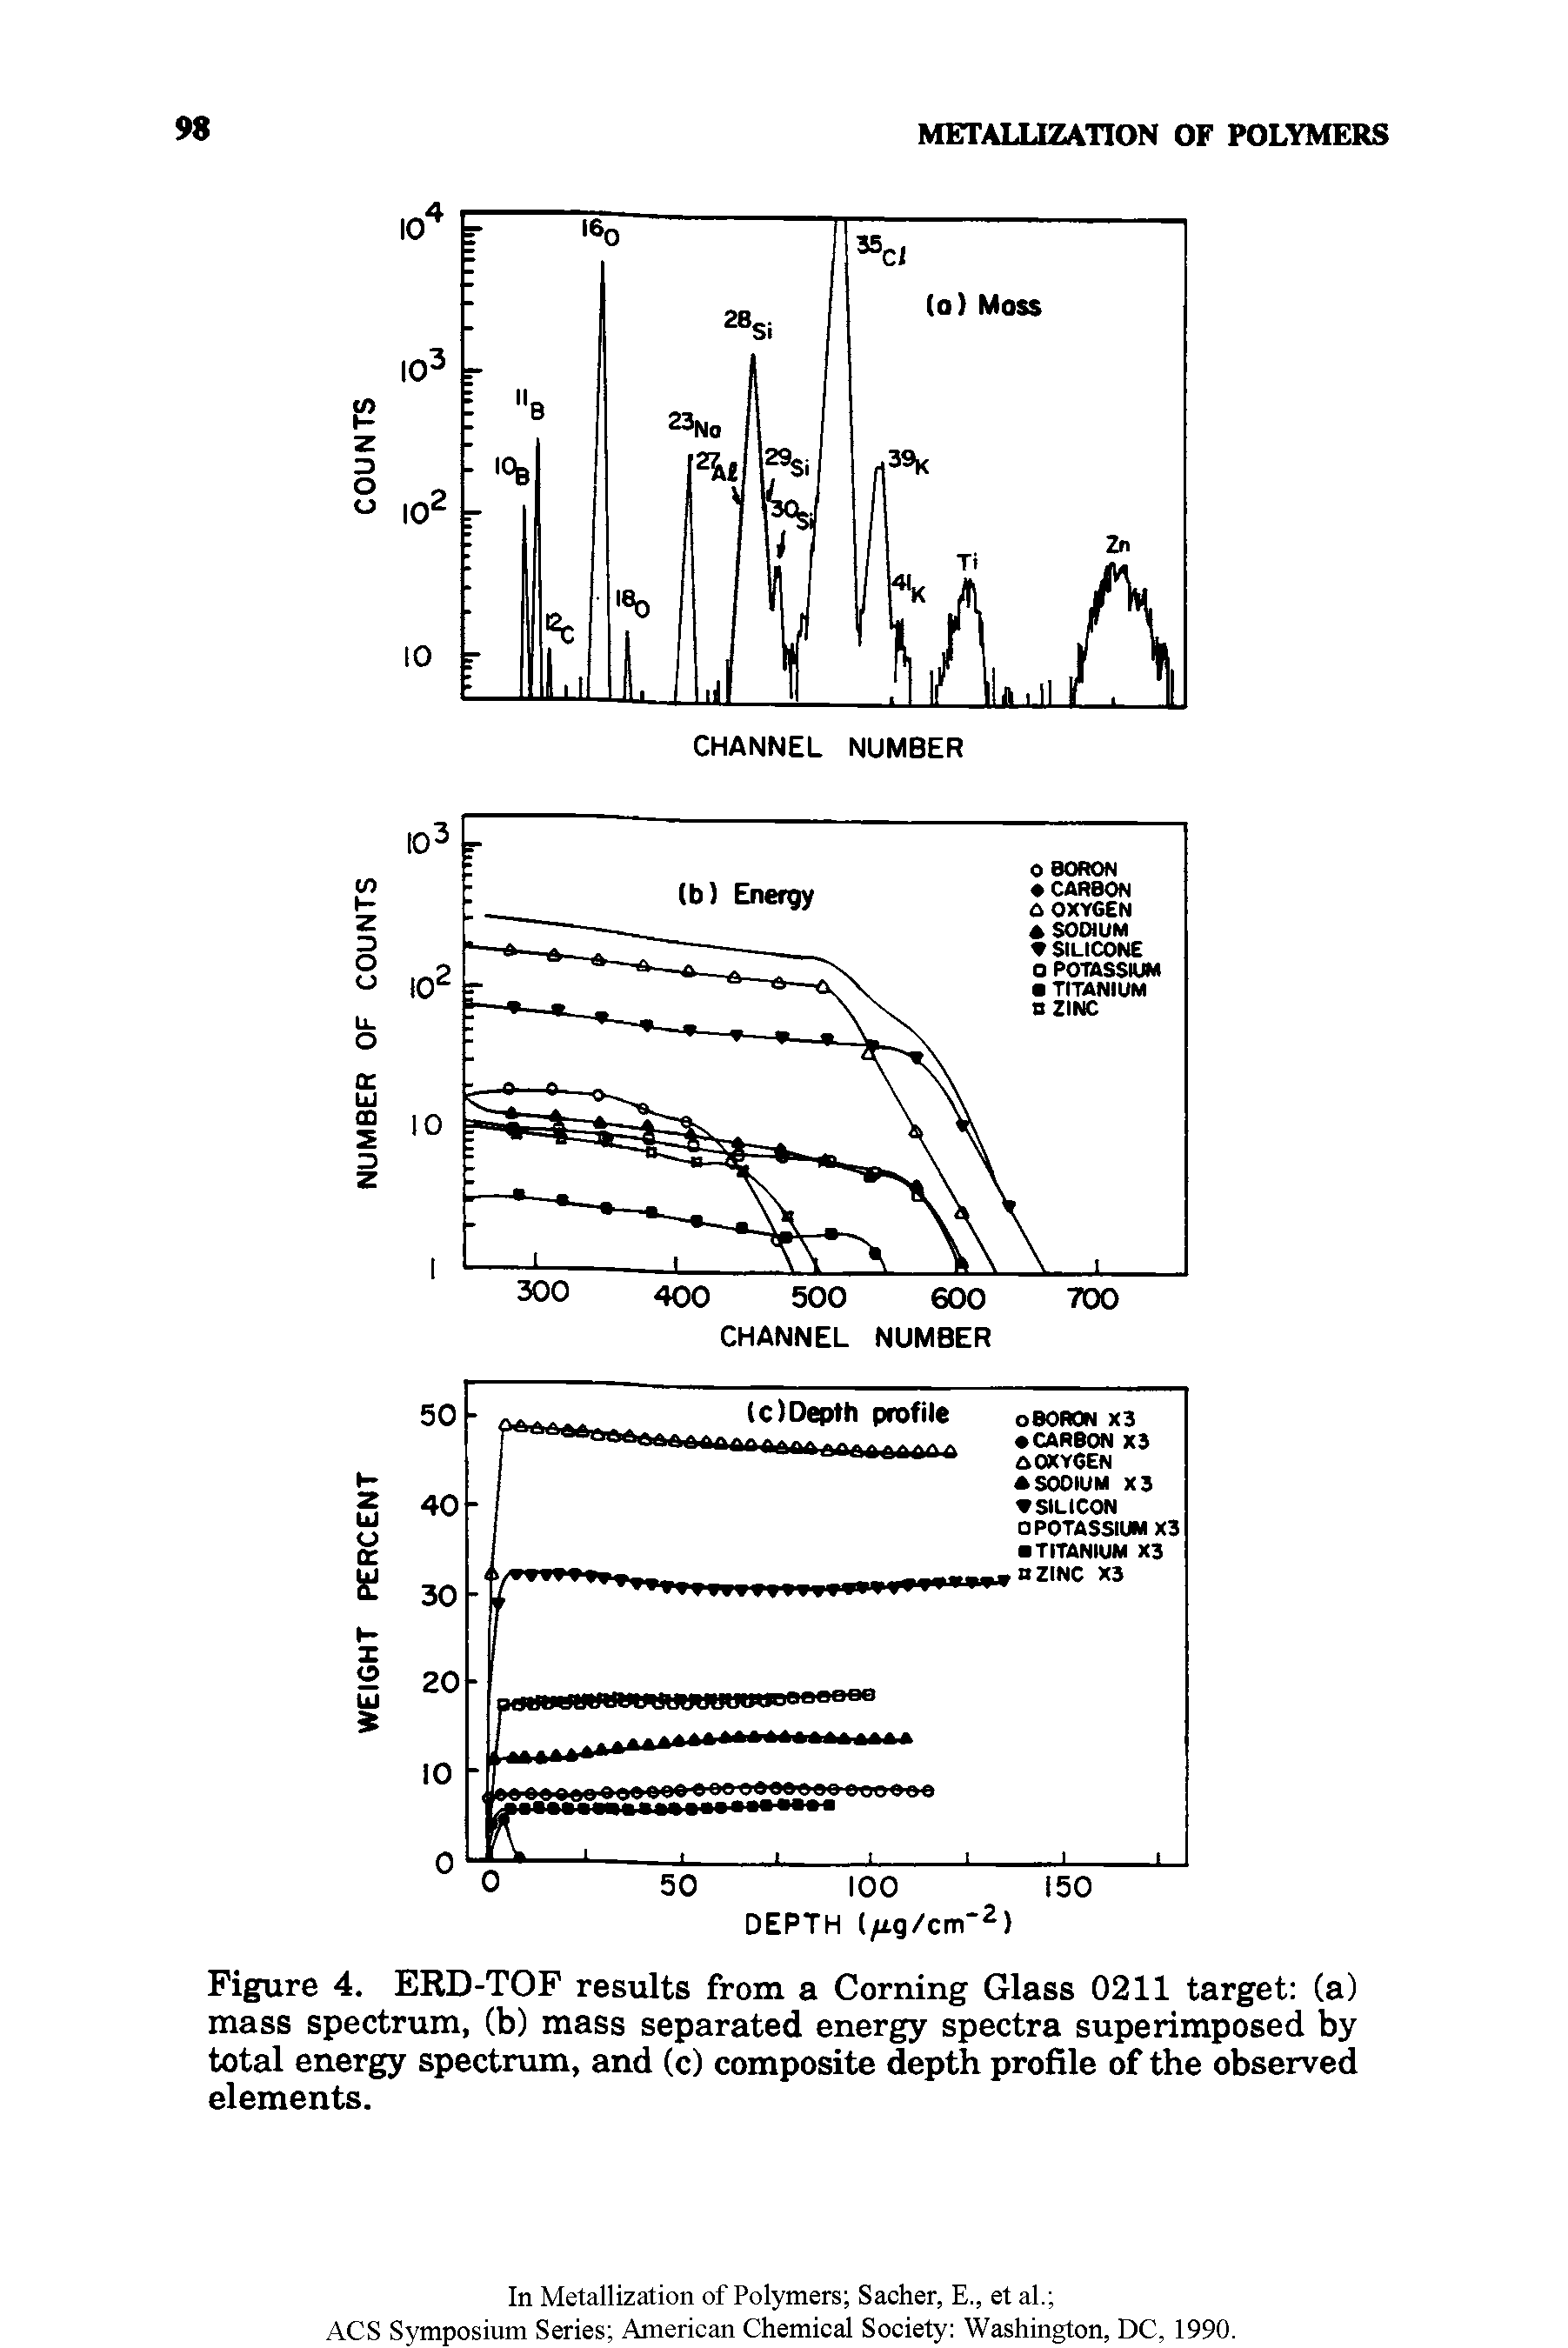 Figure 4. ERD-TOF results from a Corning Glass 0211 target (a) mass spectrum, (b) mass separated energy spectra superimposed by total energy spectrum, and (c) composite depth profile of the observed elements.